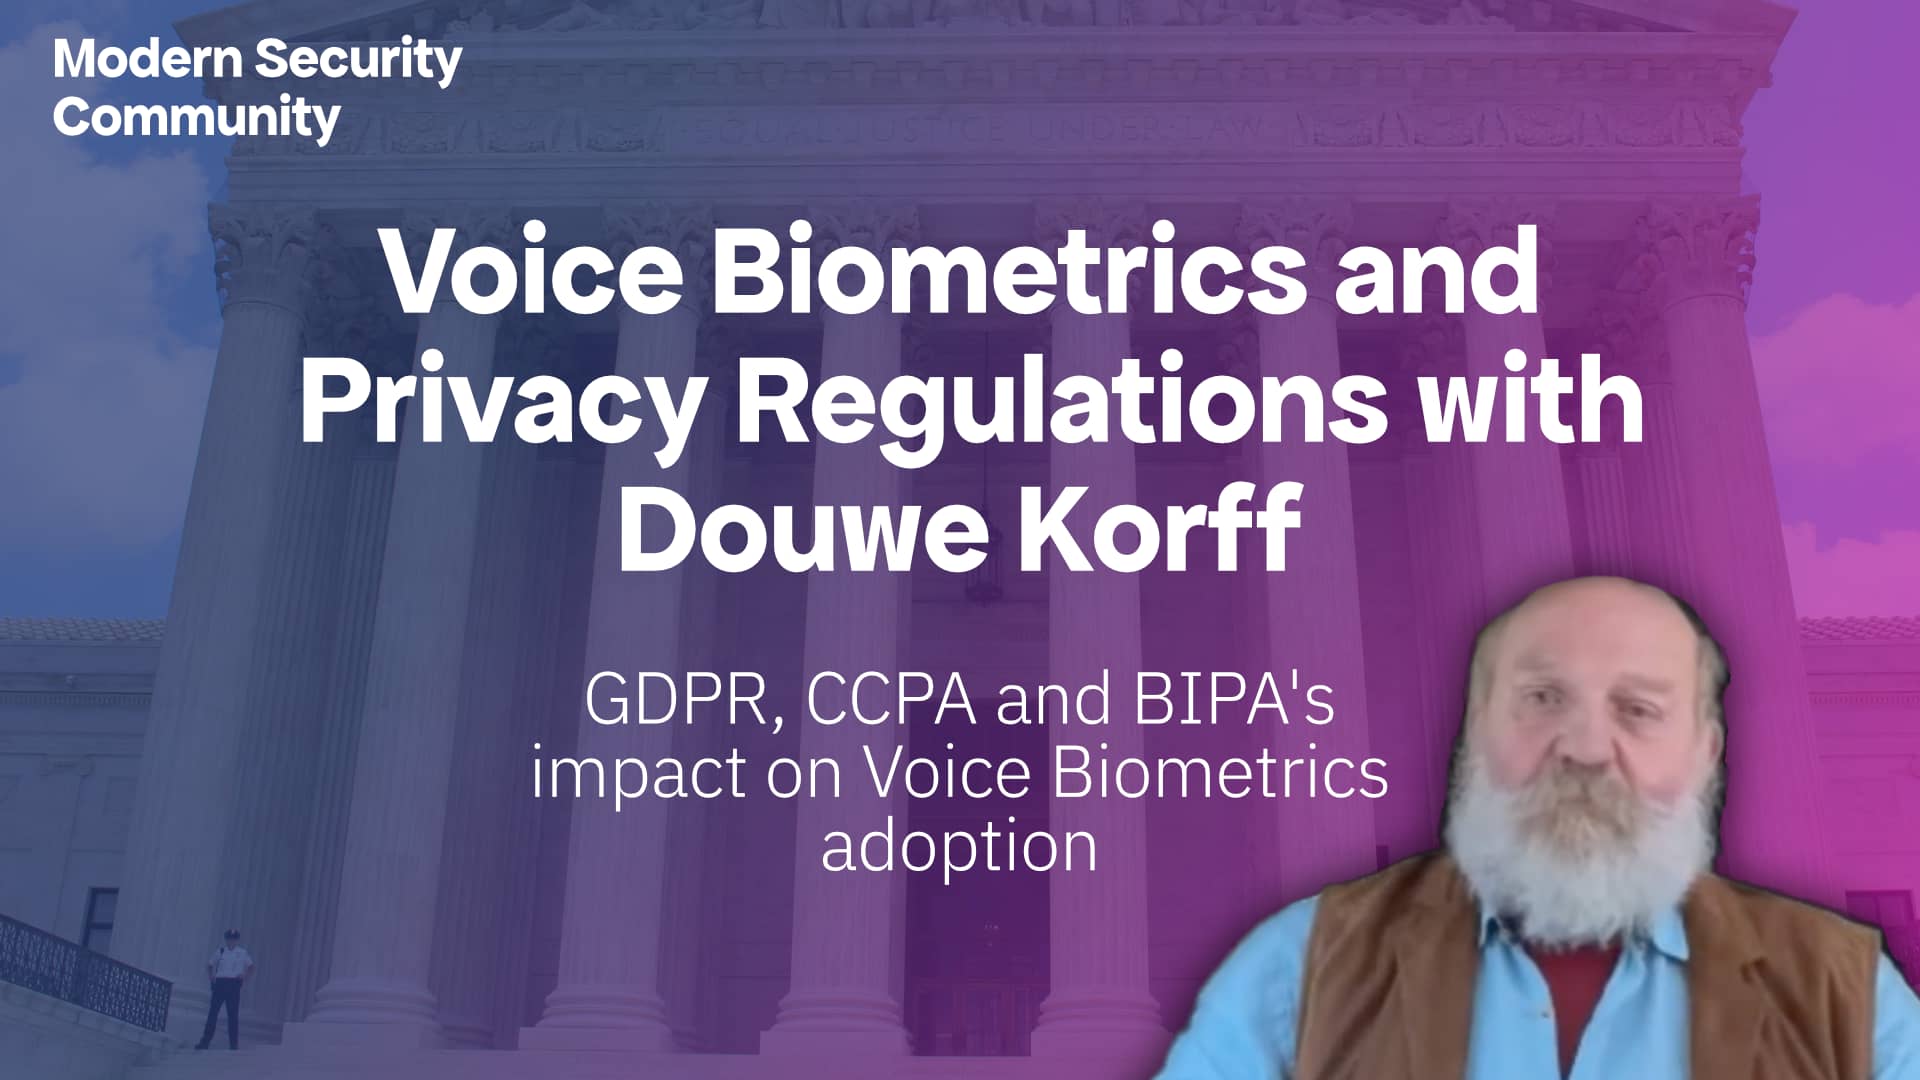 Featured image for “Voice Biometrics and Privacy Regulations with Douwe Korff”